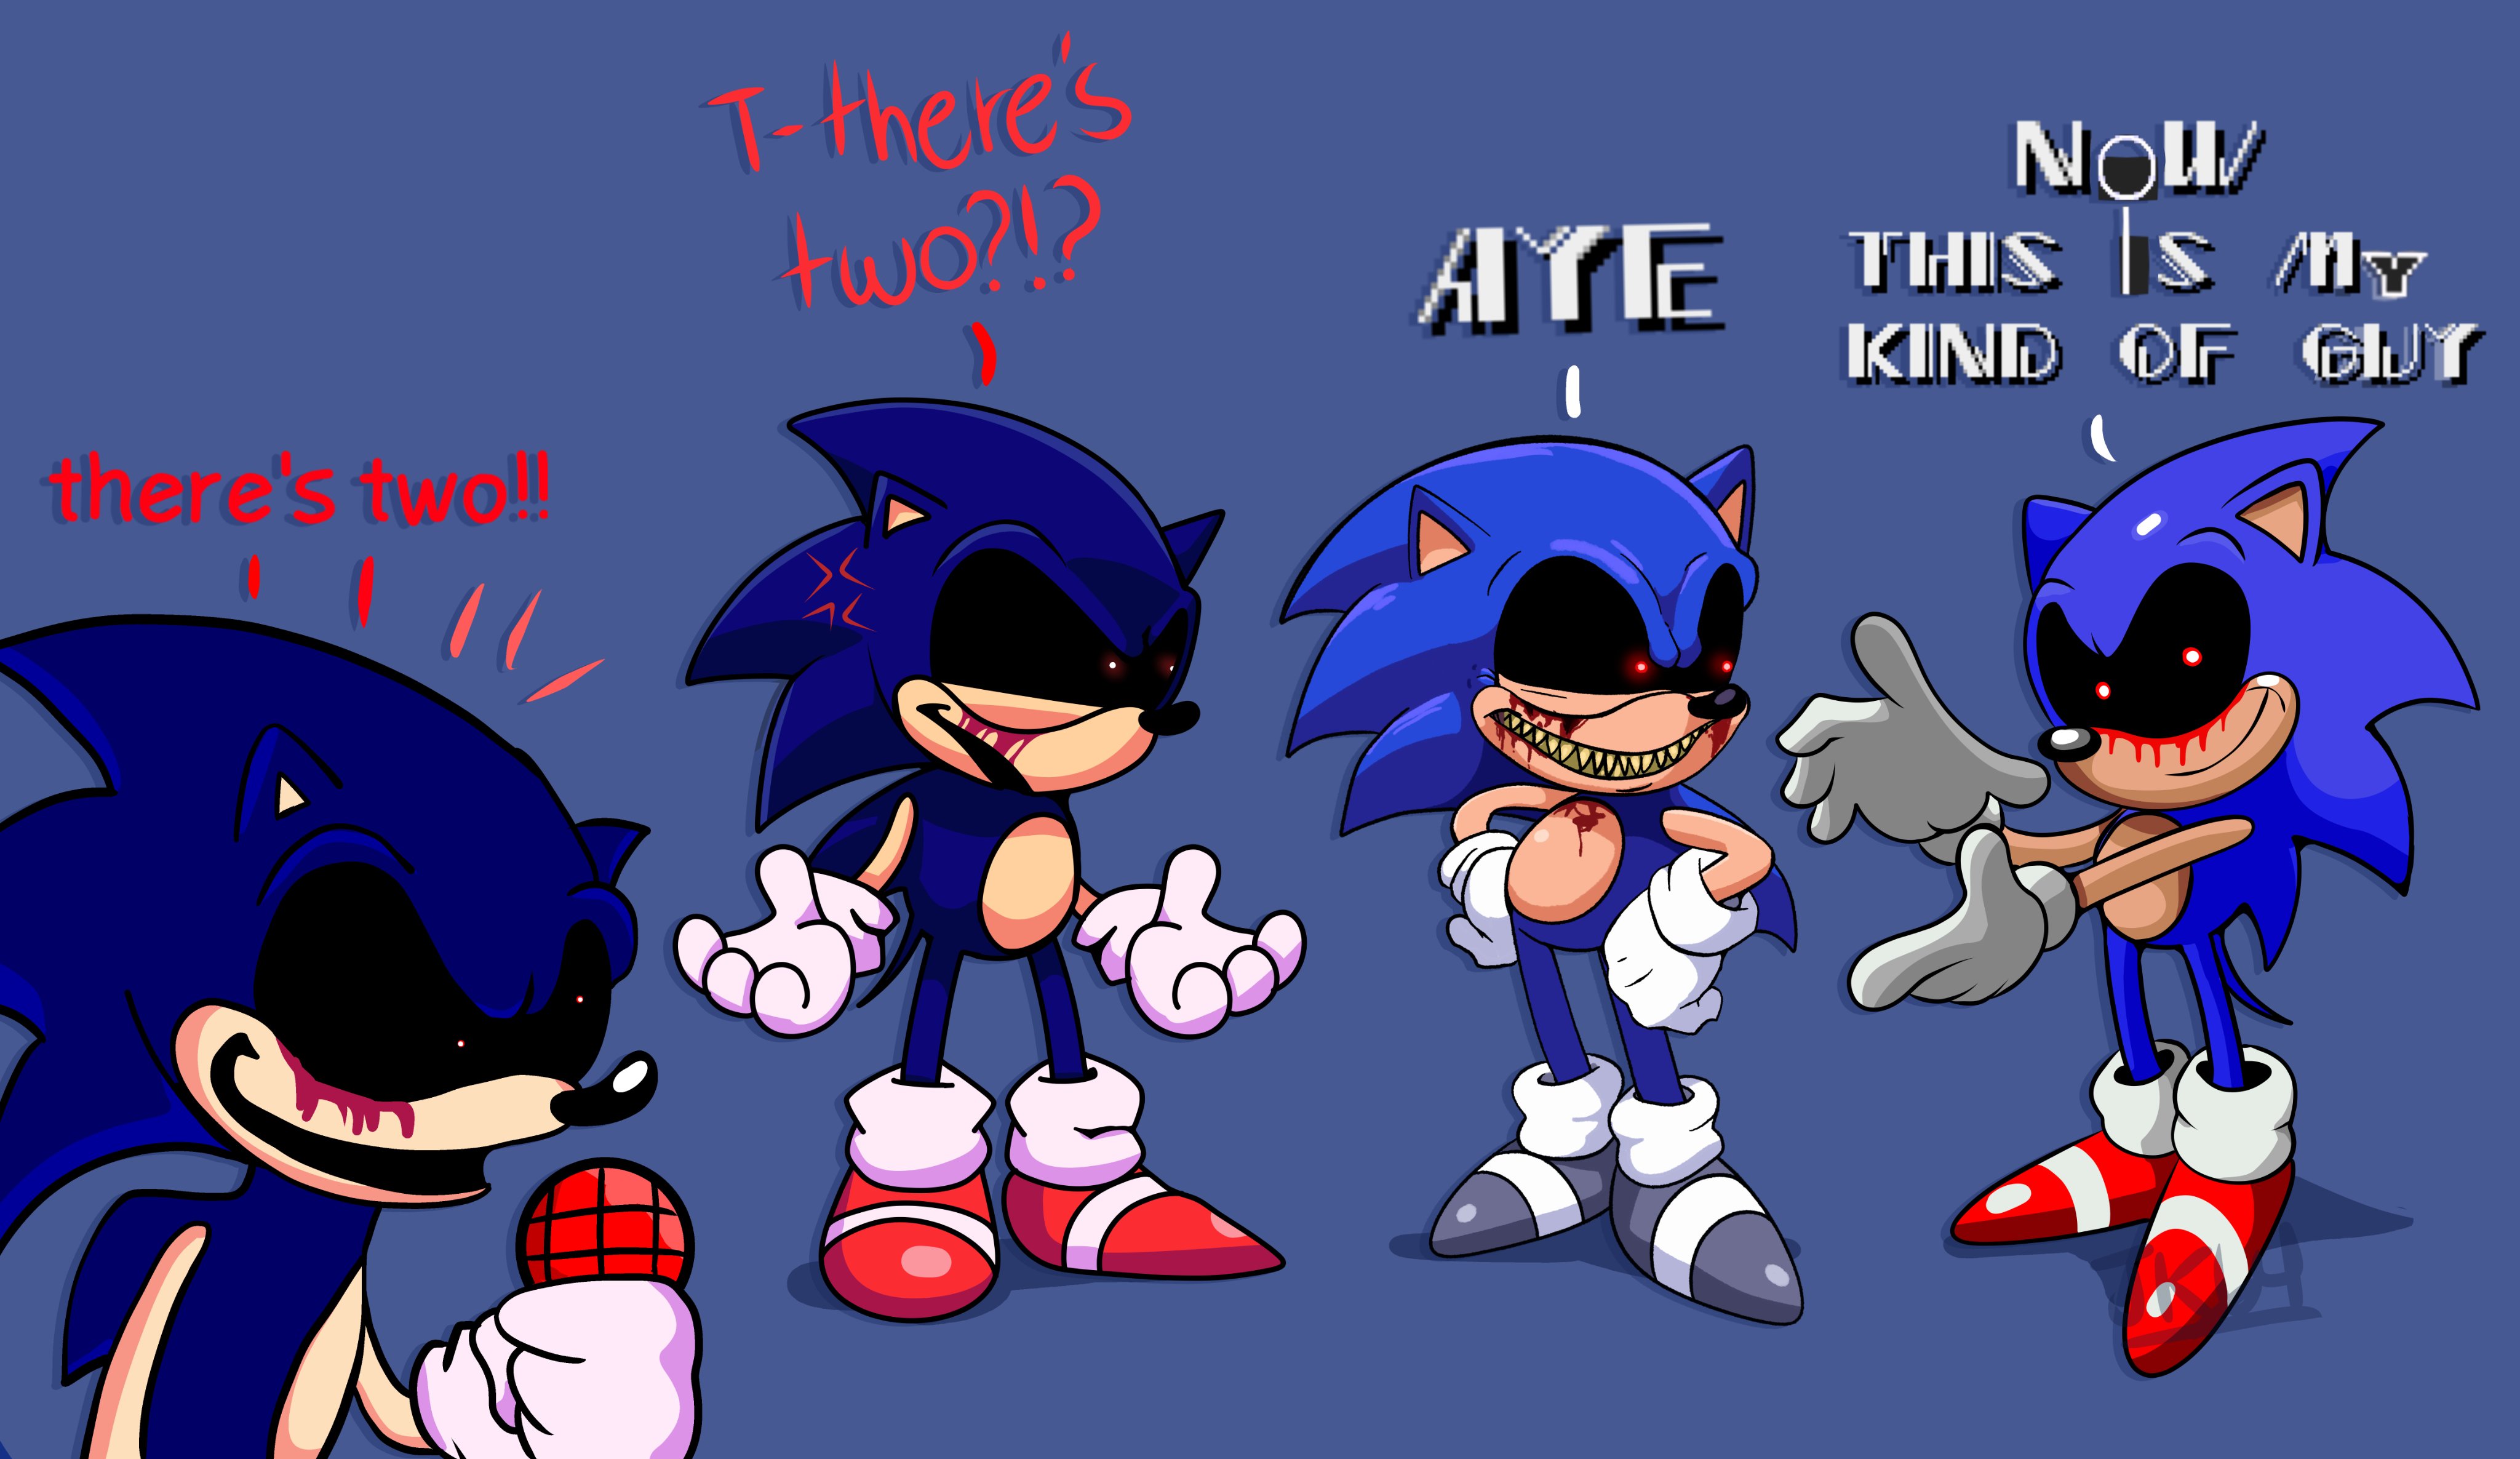 JayKay64 on X: Been a while since I've drawn these guys We got FNF sonic. exe, Xenophanes, 2011 X and OG. Sonic.EXE!!! #xenophanes #sonicexe  #fnfsonicexe #2011x #sonicexecommunity #execommunity #EXE   / X